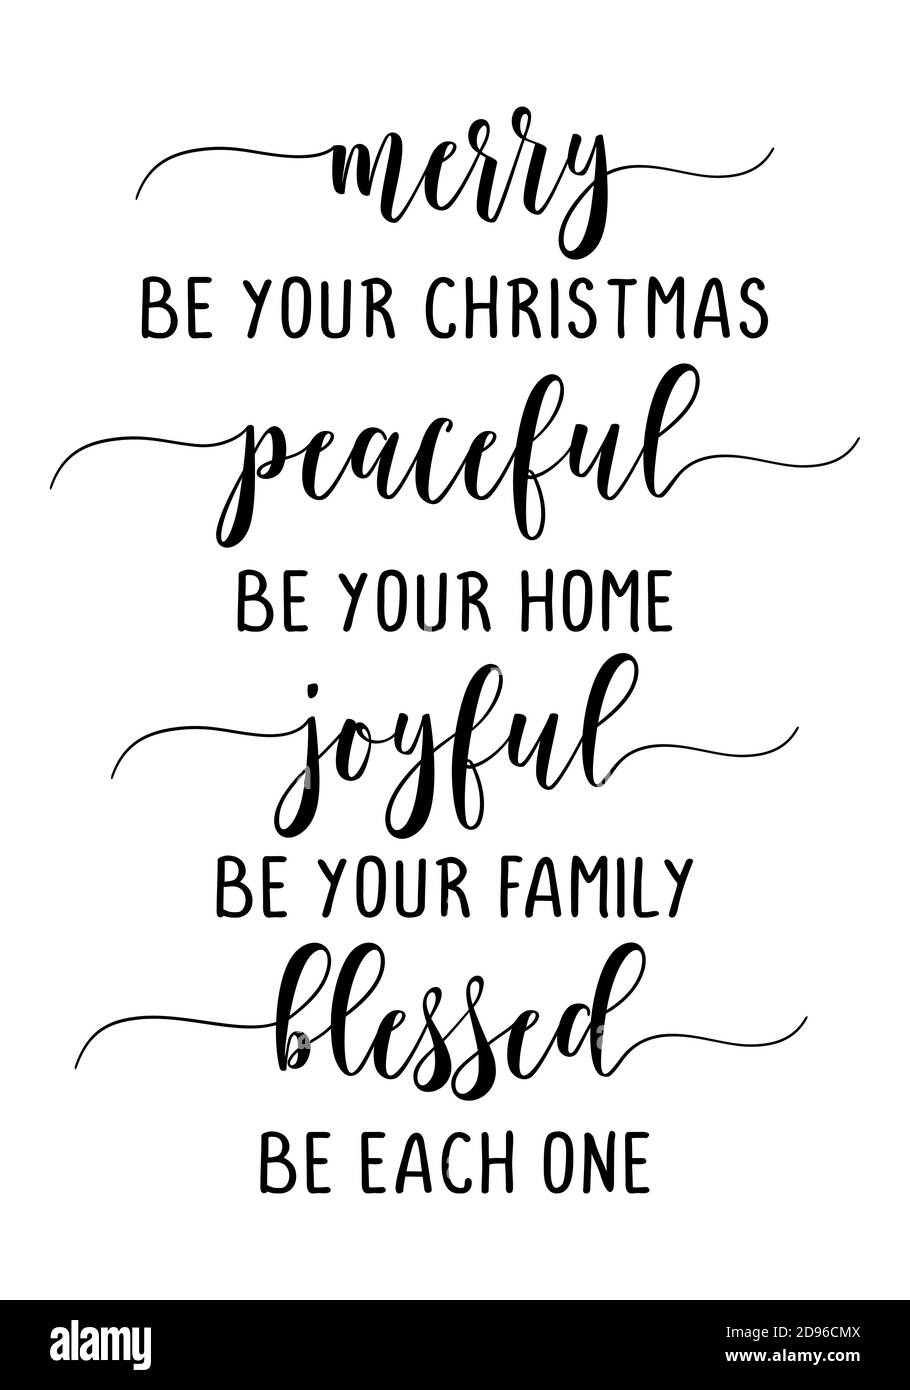 Merry Be Your Christmas, Peaceful Be Your Home, Joyful Be Your Family, Blessed Be Each One - A gentle reminder of what is most important this Christma Stock Vector